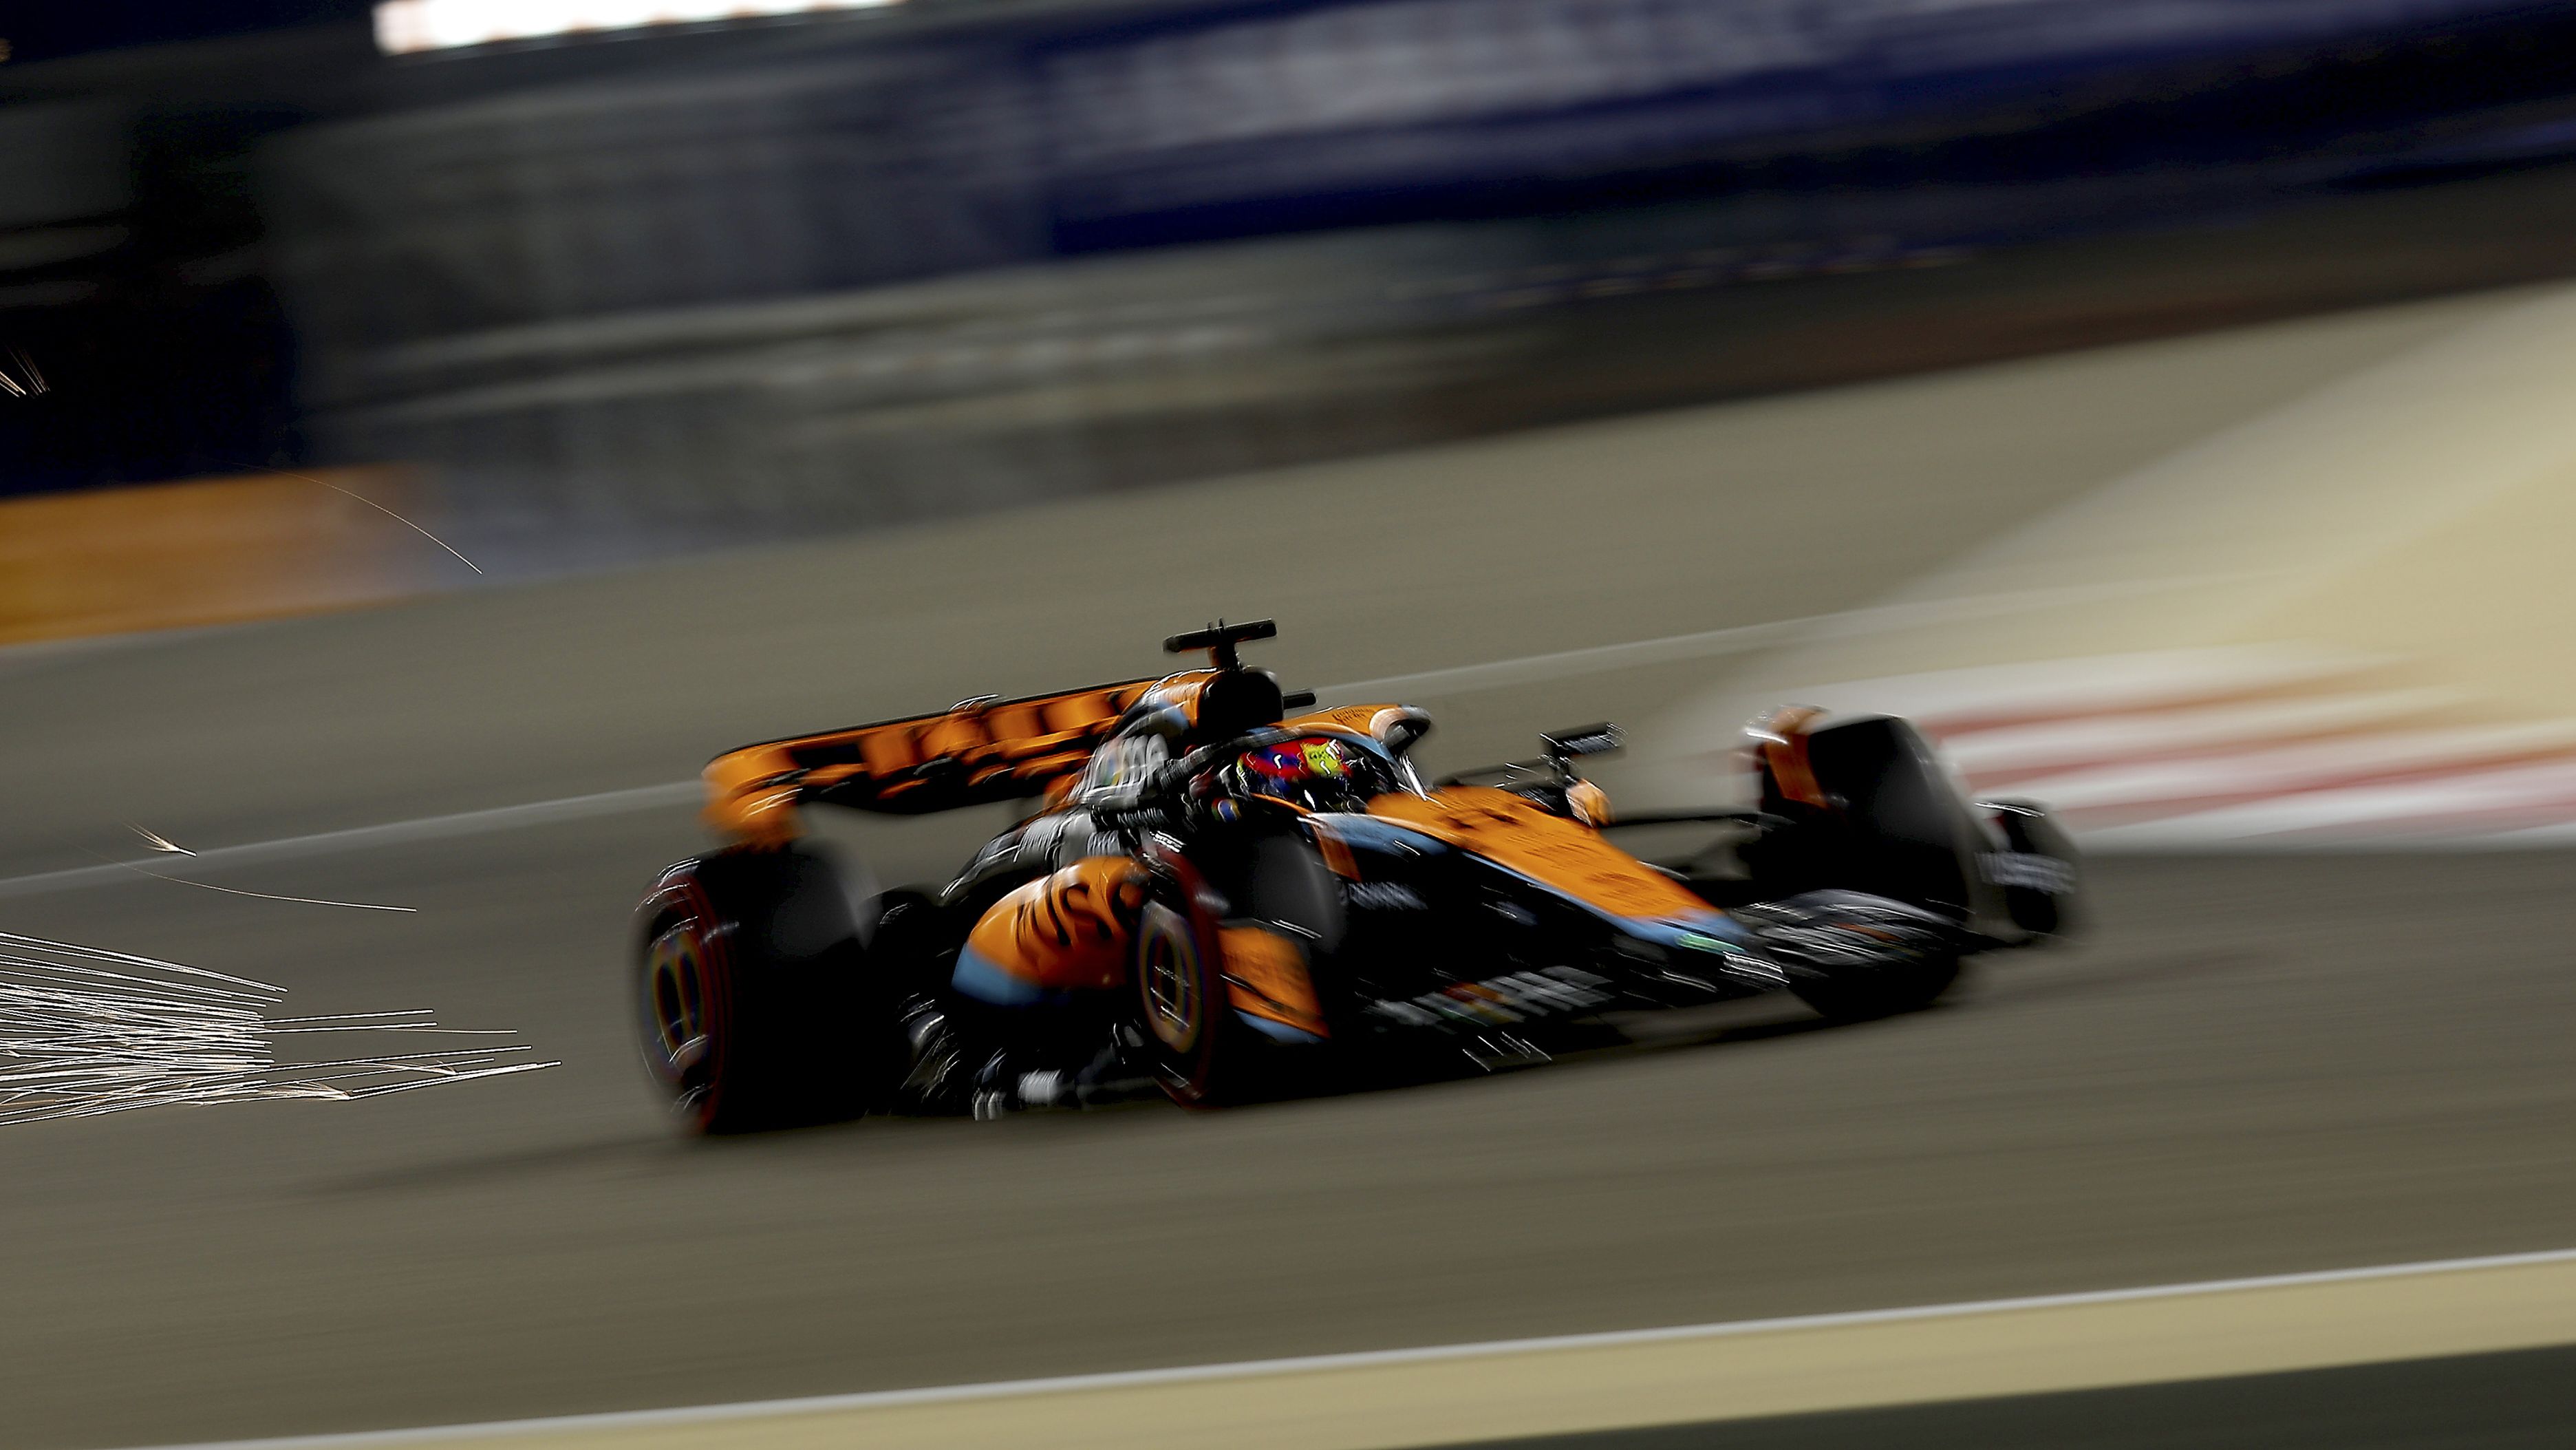 Oscar Piastri of Australia driving the McLaren MCL60 on track during qualifying ahead of the F1 Grand Prix of Bahrain. (Photo by Eric Alonso/Getty Images)